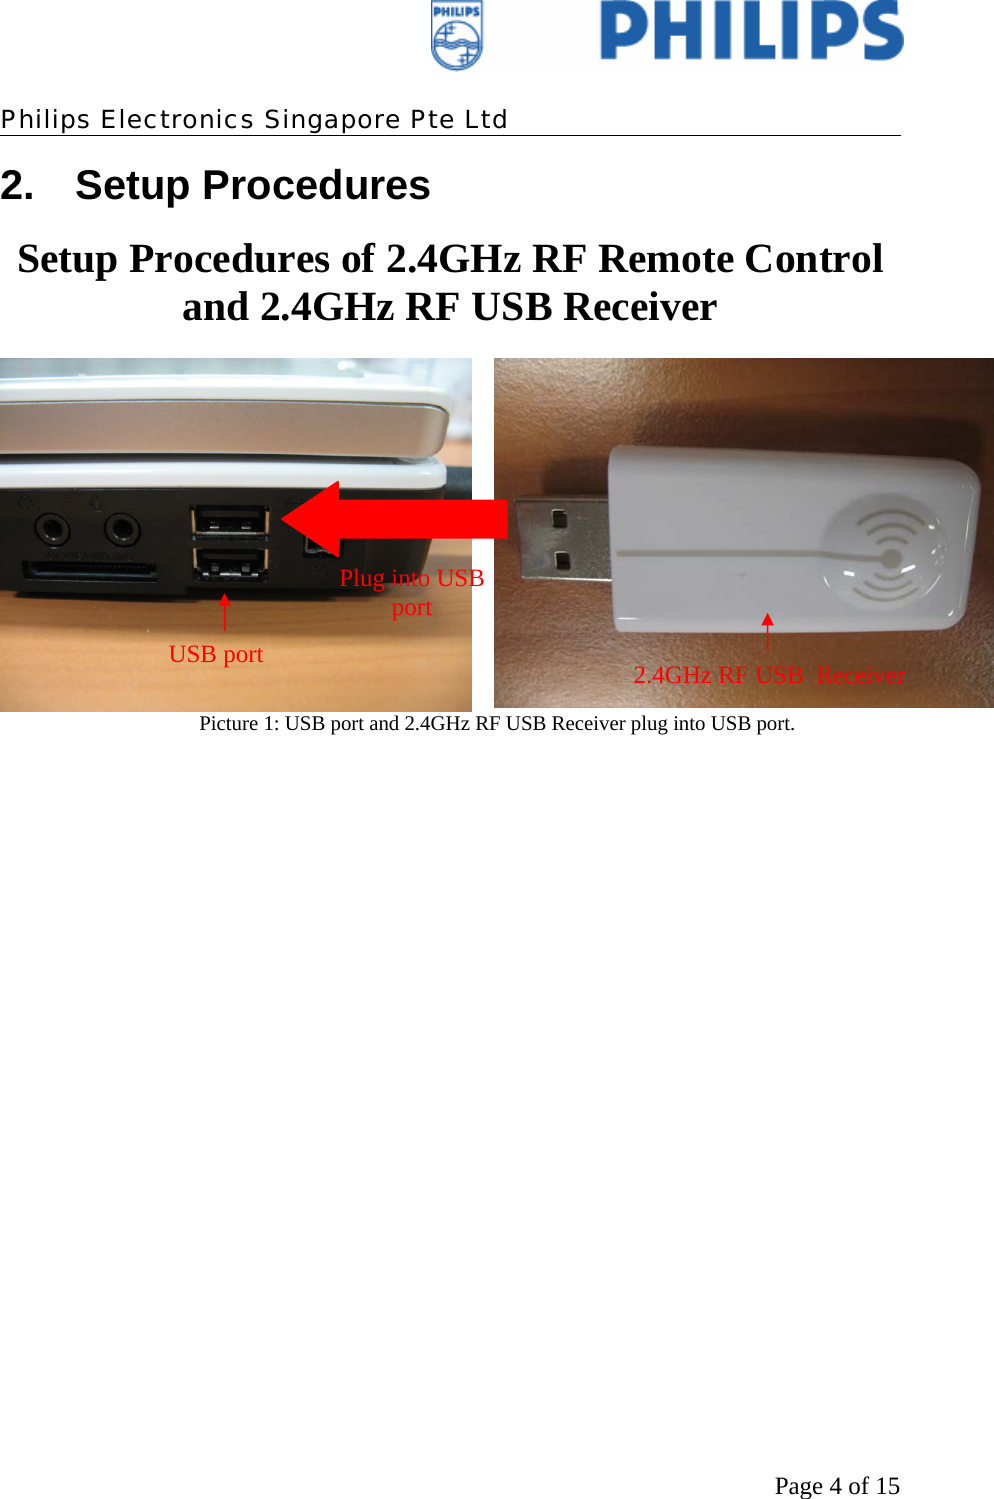    Philips Electronics Singapore Pte Ltd  Page 4 of 152. Setup Procedures Setup Procedures of 2.4GHz RF Remote Control and 2.4GHz RF USB Receiver   Picture 1: USB port and 2.4GHz RF USB Receiver plug into USB port.  USB port  2.4GHz RF USB  Receiver Plug into USB port 